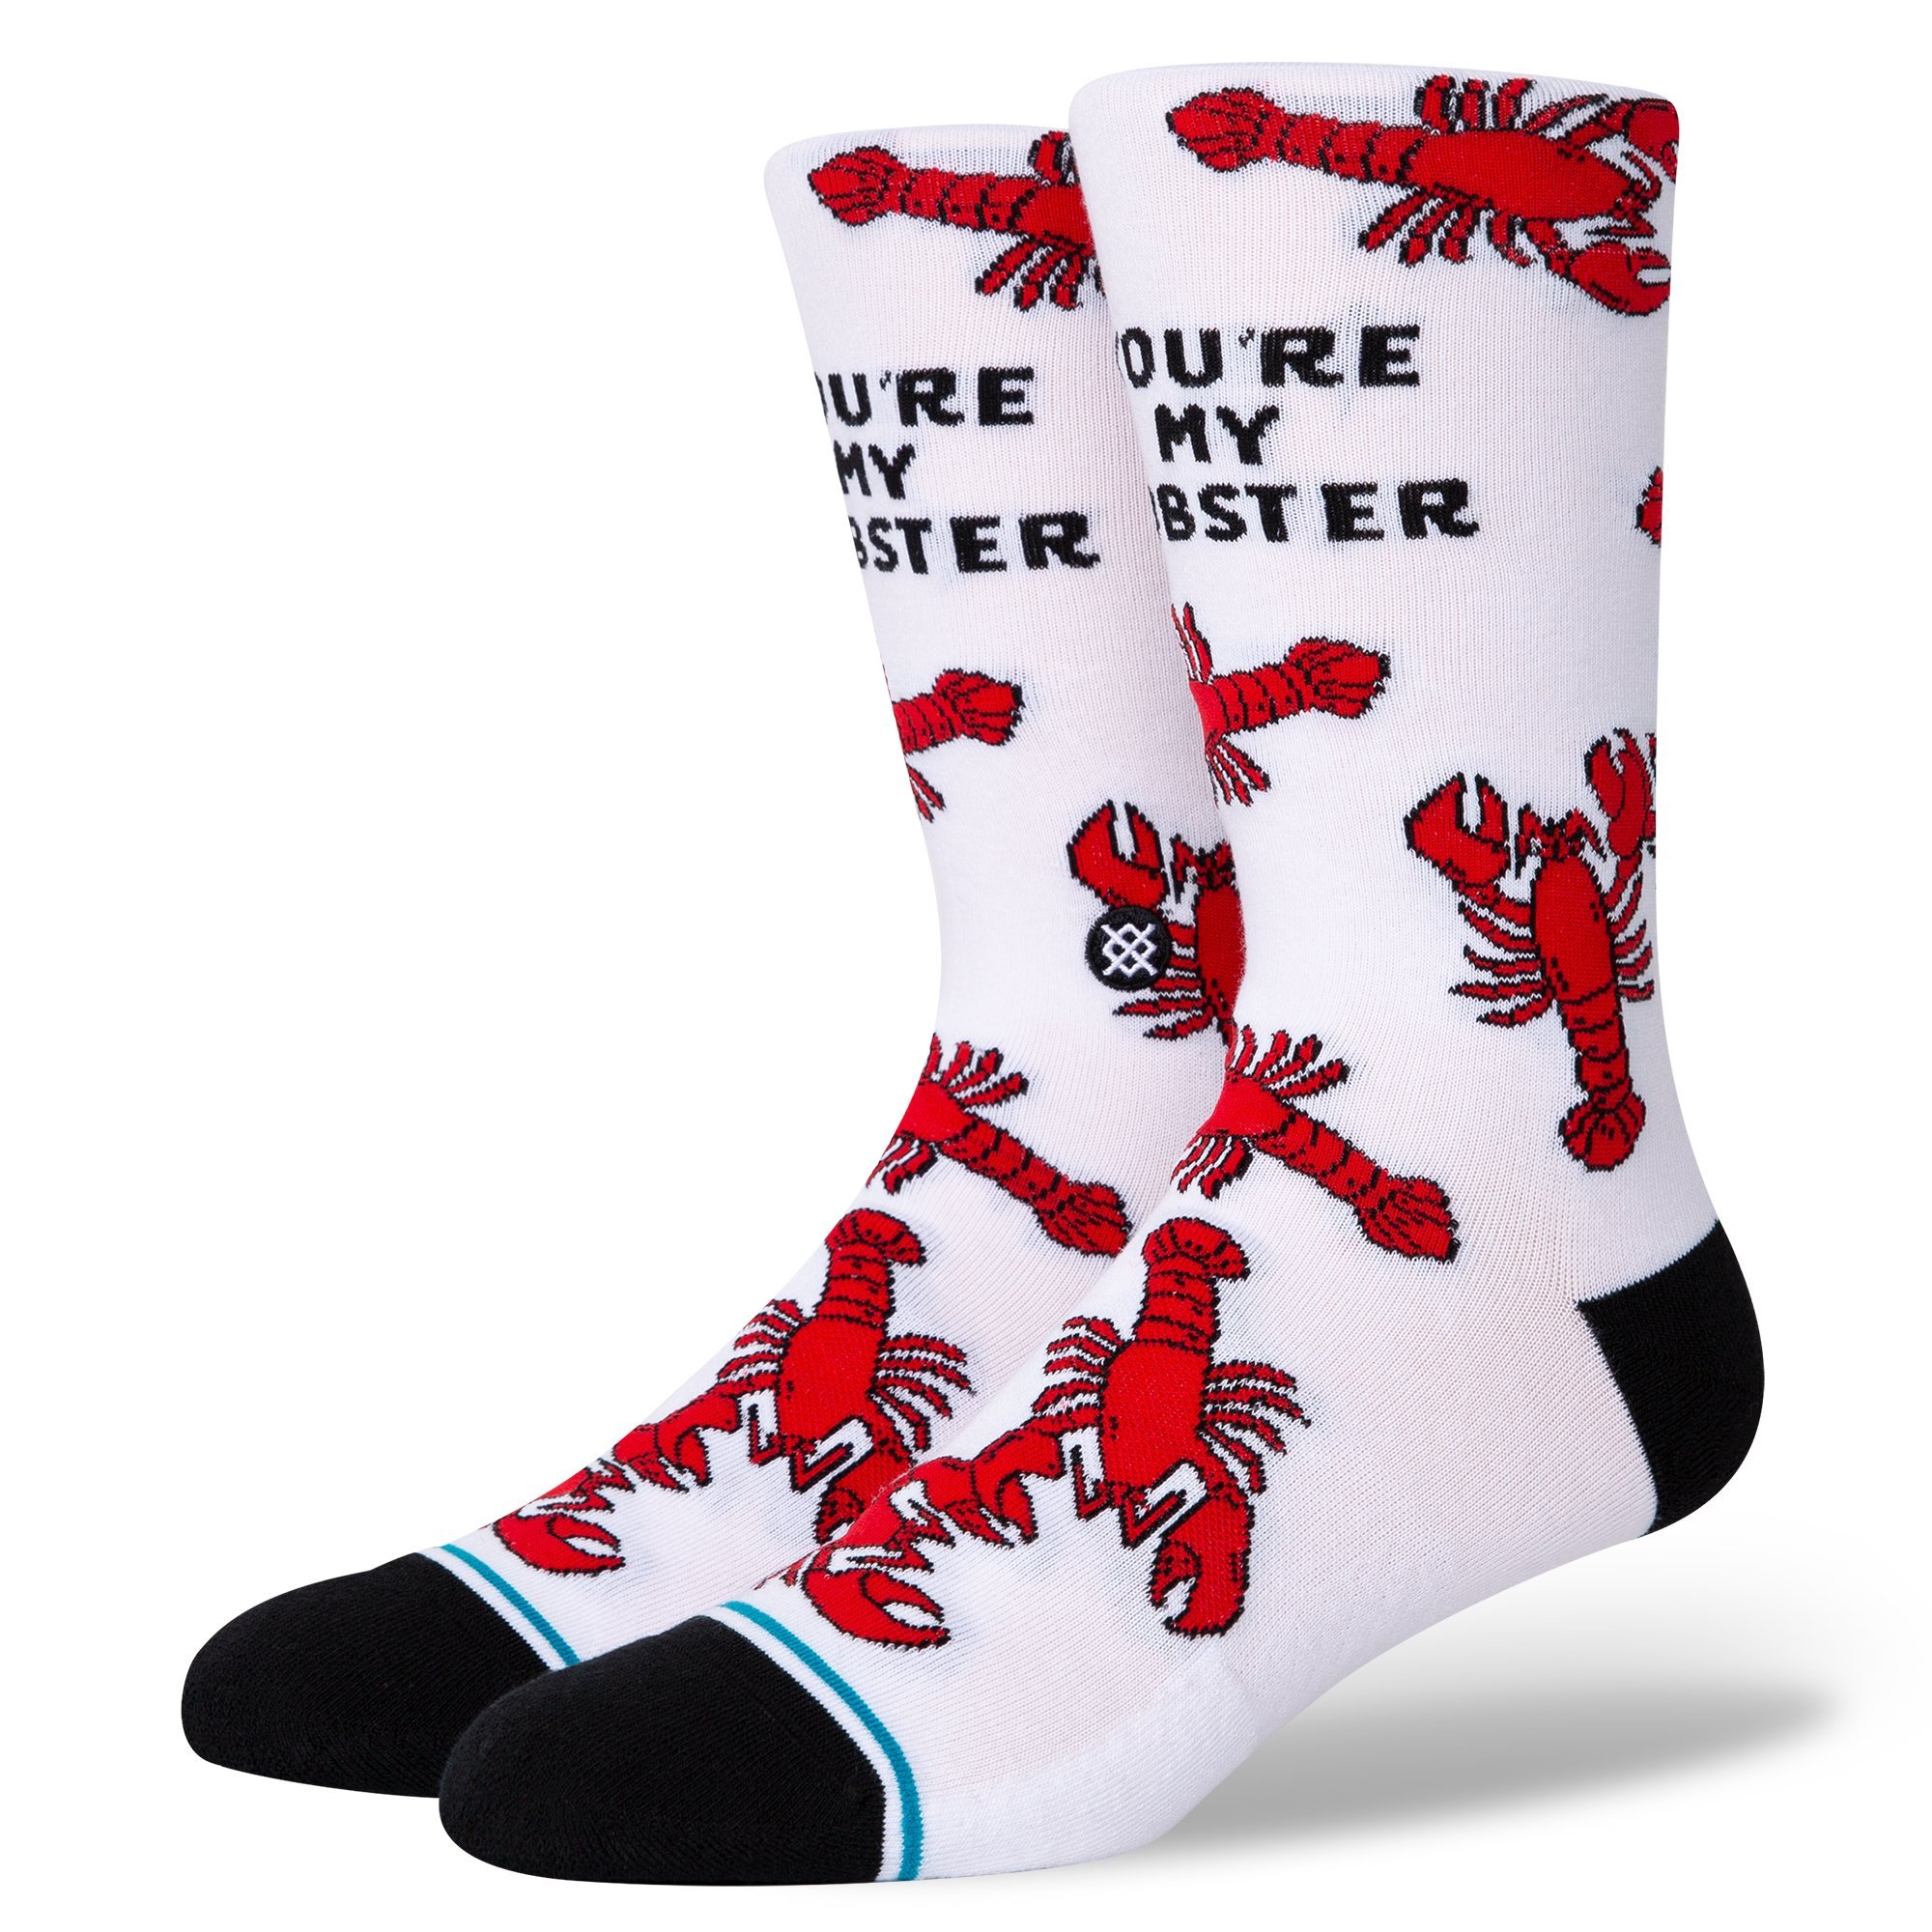 stance-friends-you-re-my-lobster-casual-socks-crew-1.jpg